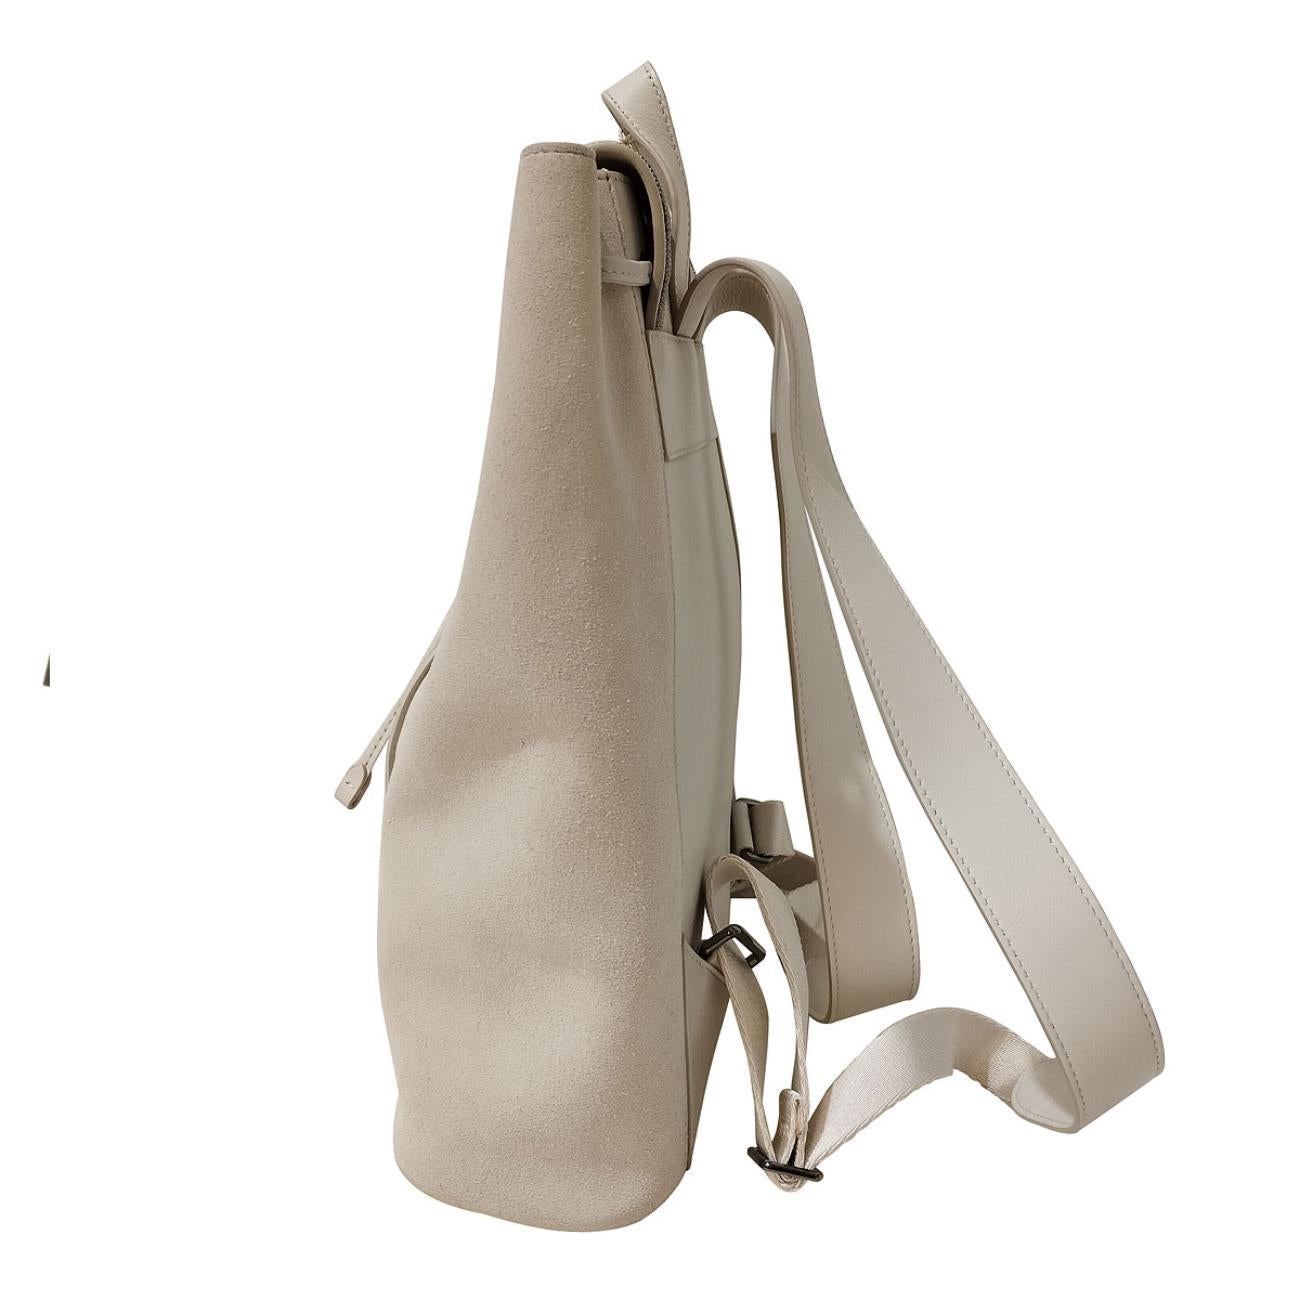 Leather backpack
Suede
Iced color
Rhodium monili
Internal zip pocket
Cm 33 x 23 x 11 (11,4 x 9 x 4,33 inches)
Original price € 2400
